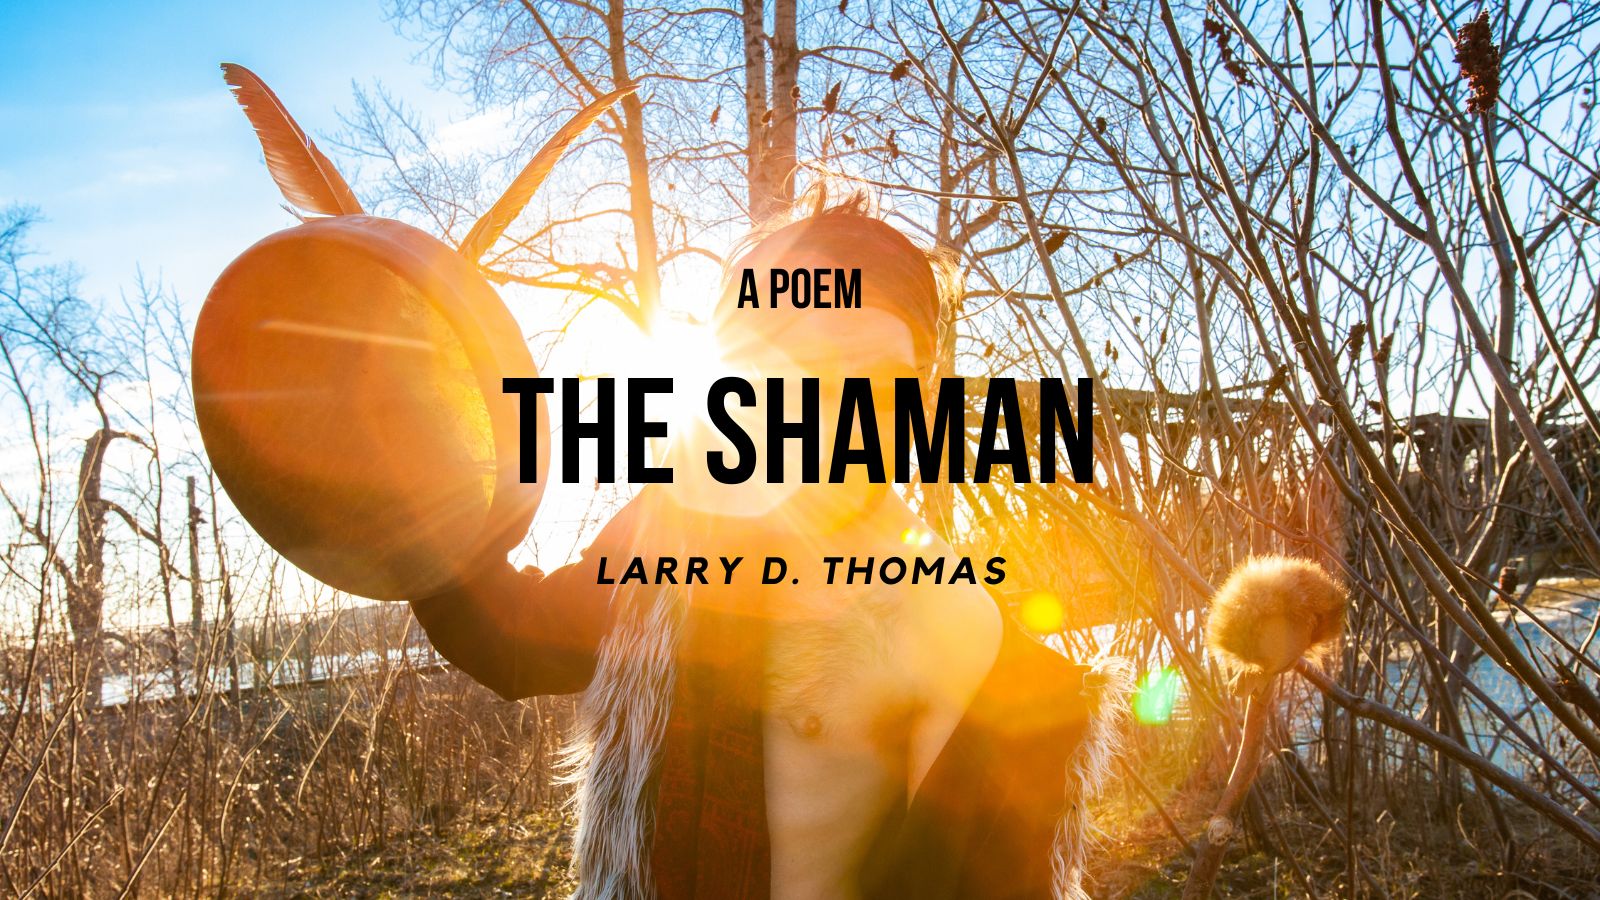 The Shaman by Larry D. Thomas